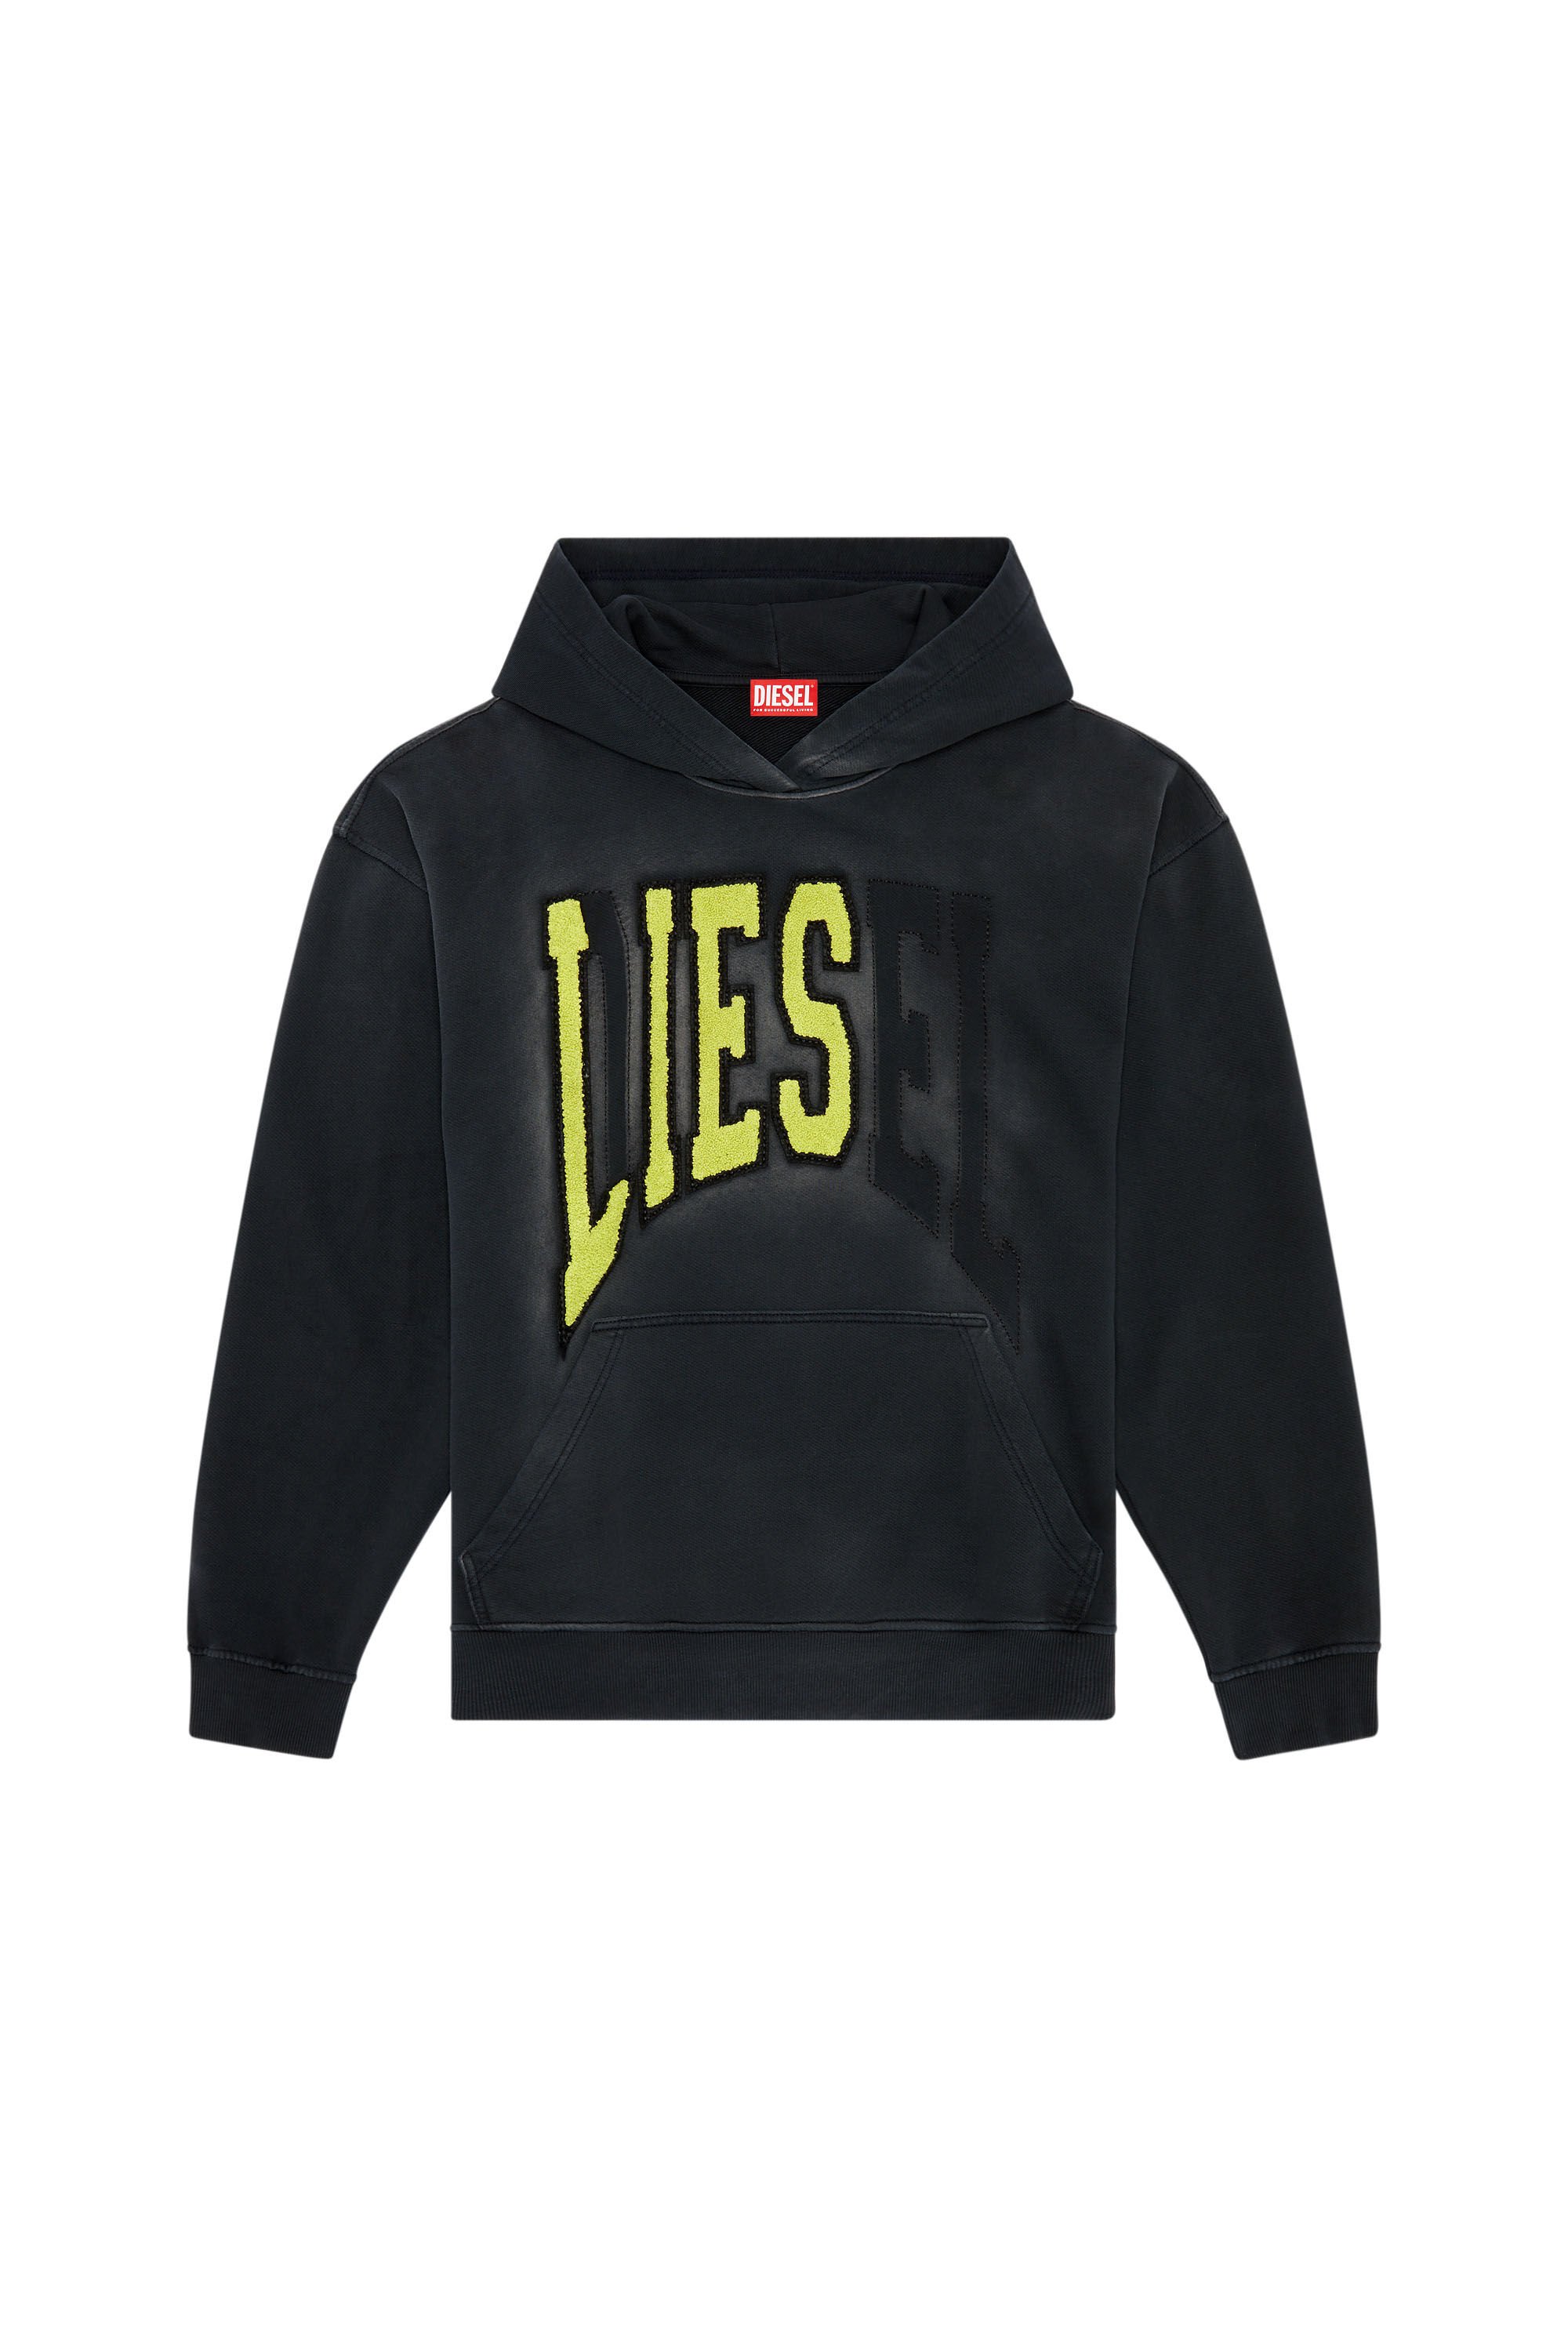 Diesel - S-BOXT-HOOD, Man College hoodie with LIES patches in Black - Image 3